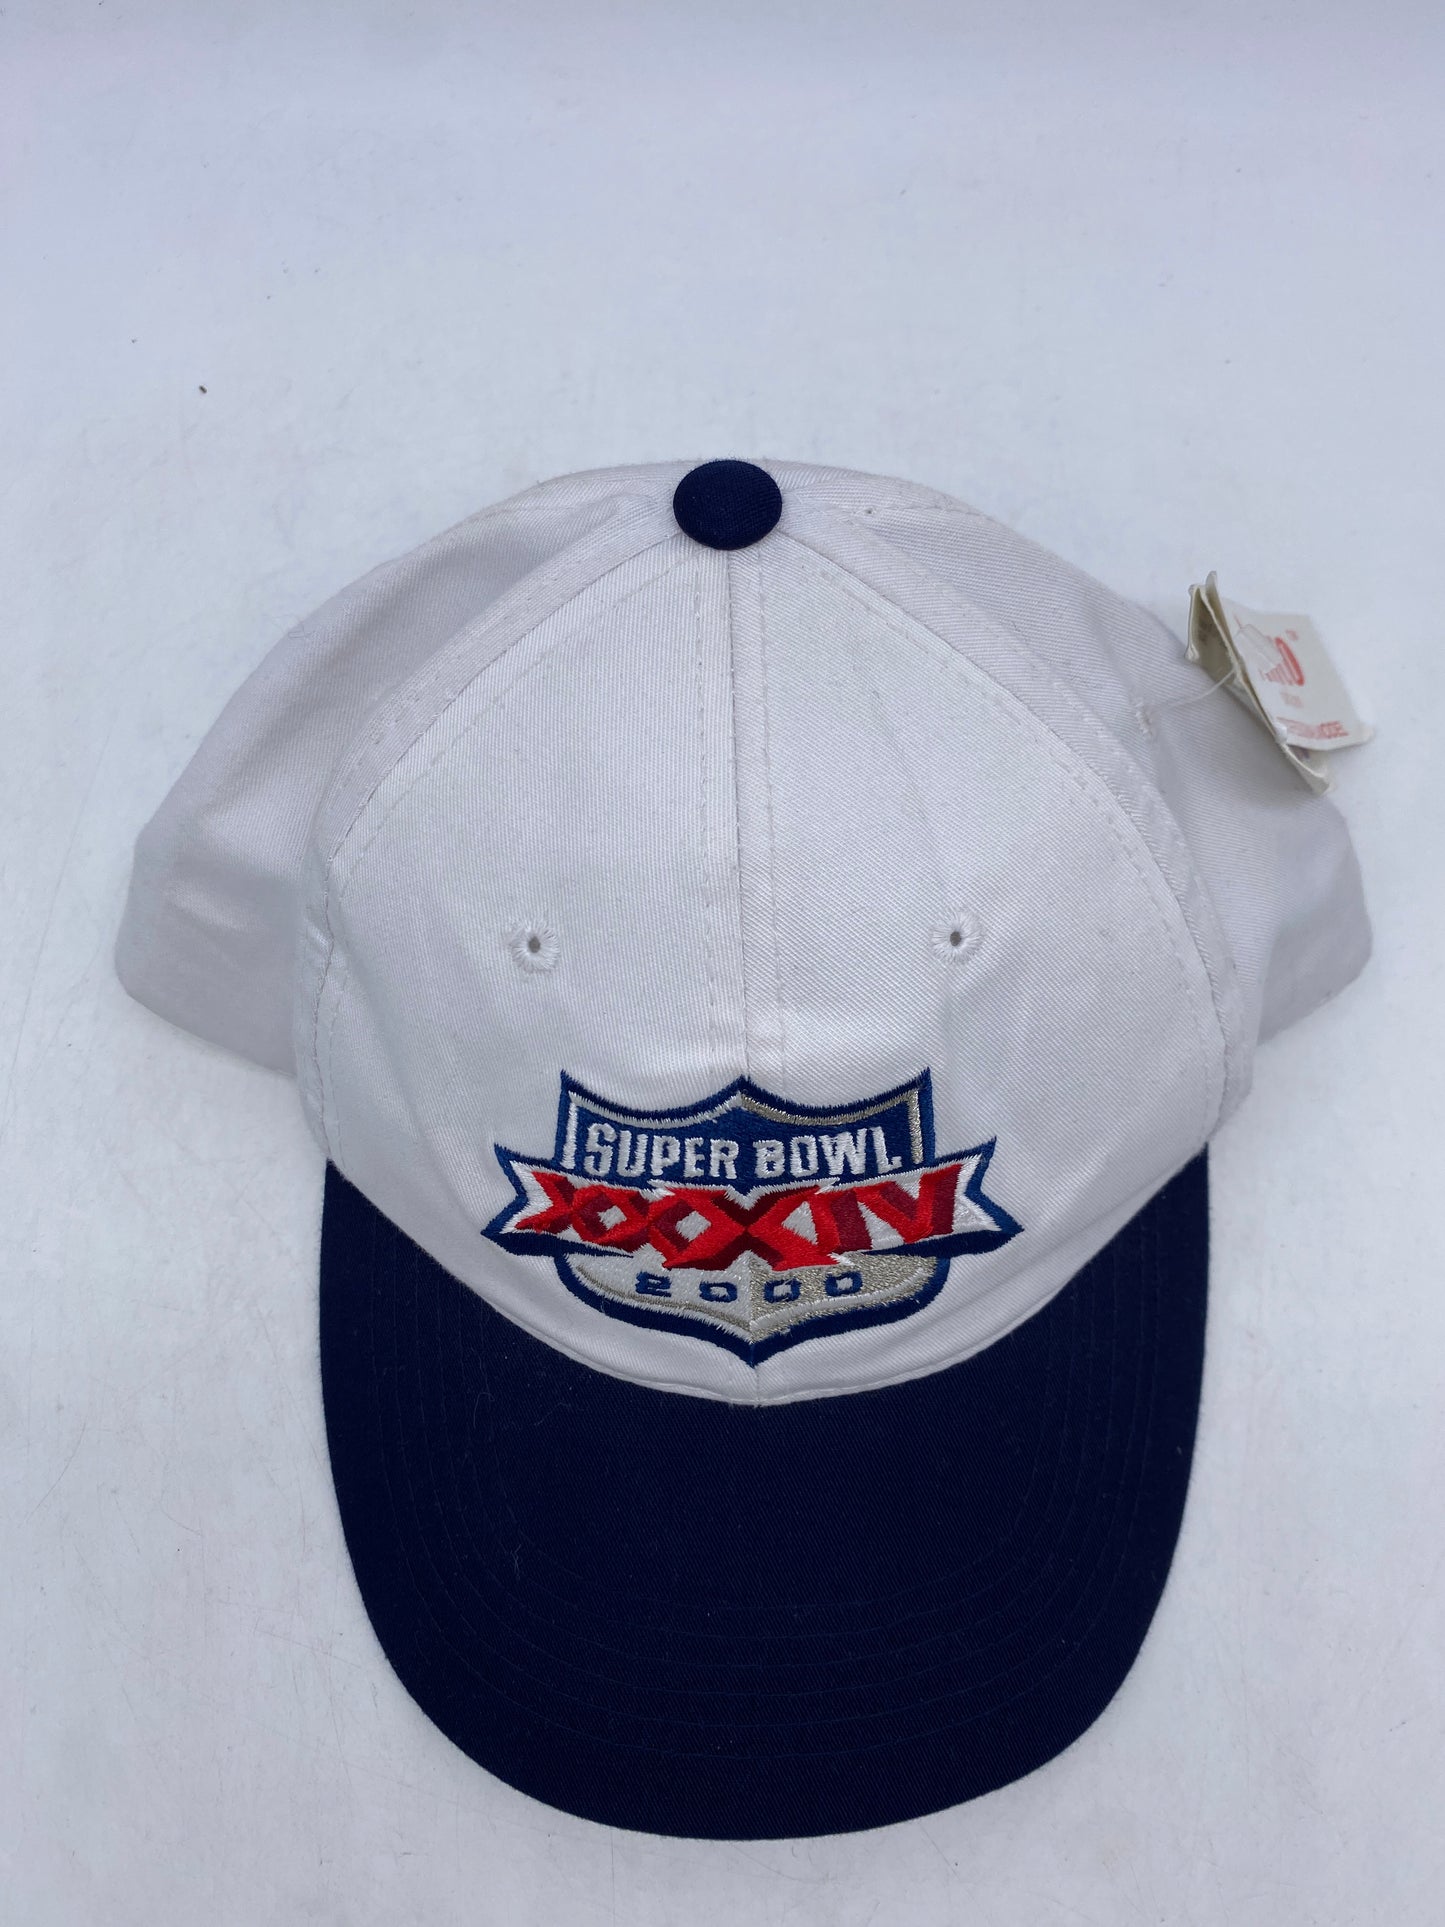 Load image into Gallery viewer, VTG New Super Bowl 2000 Snapback
